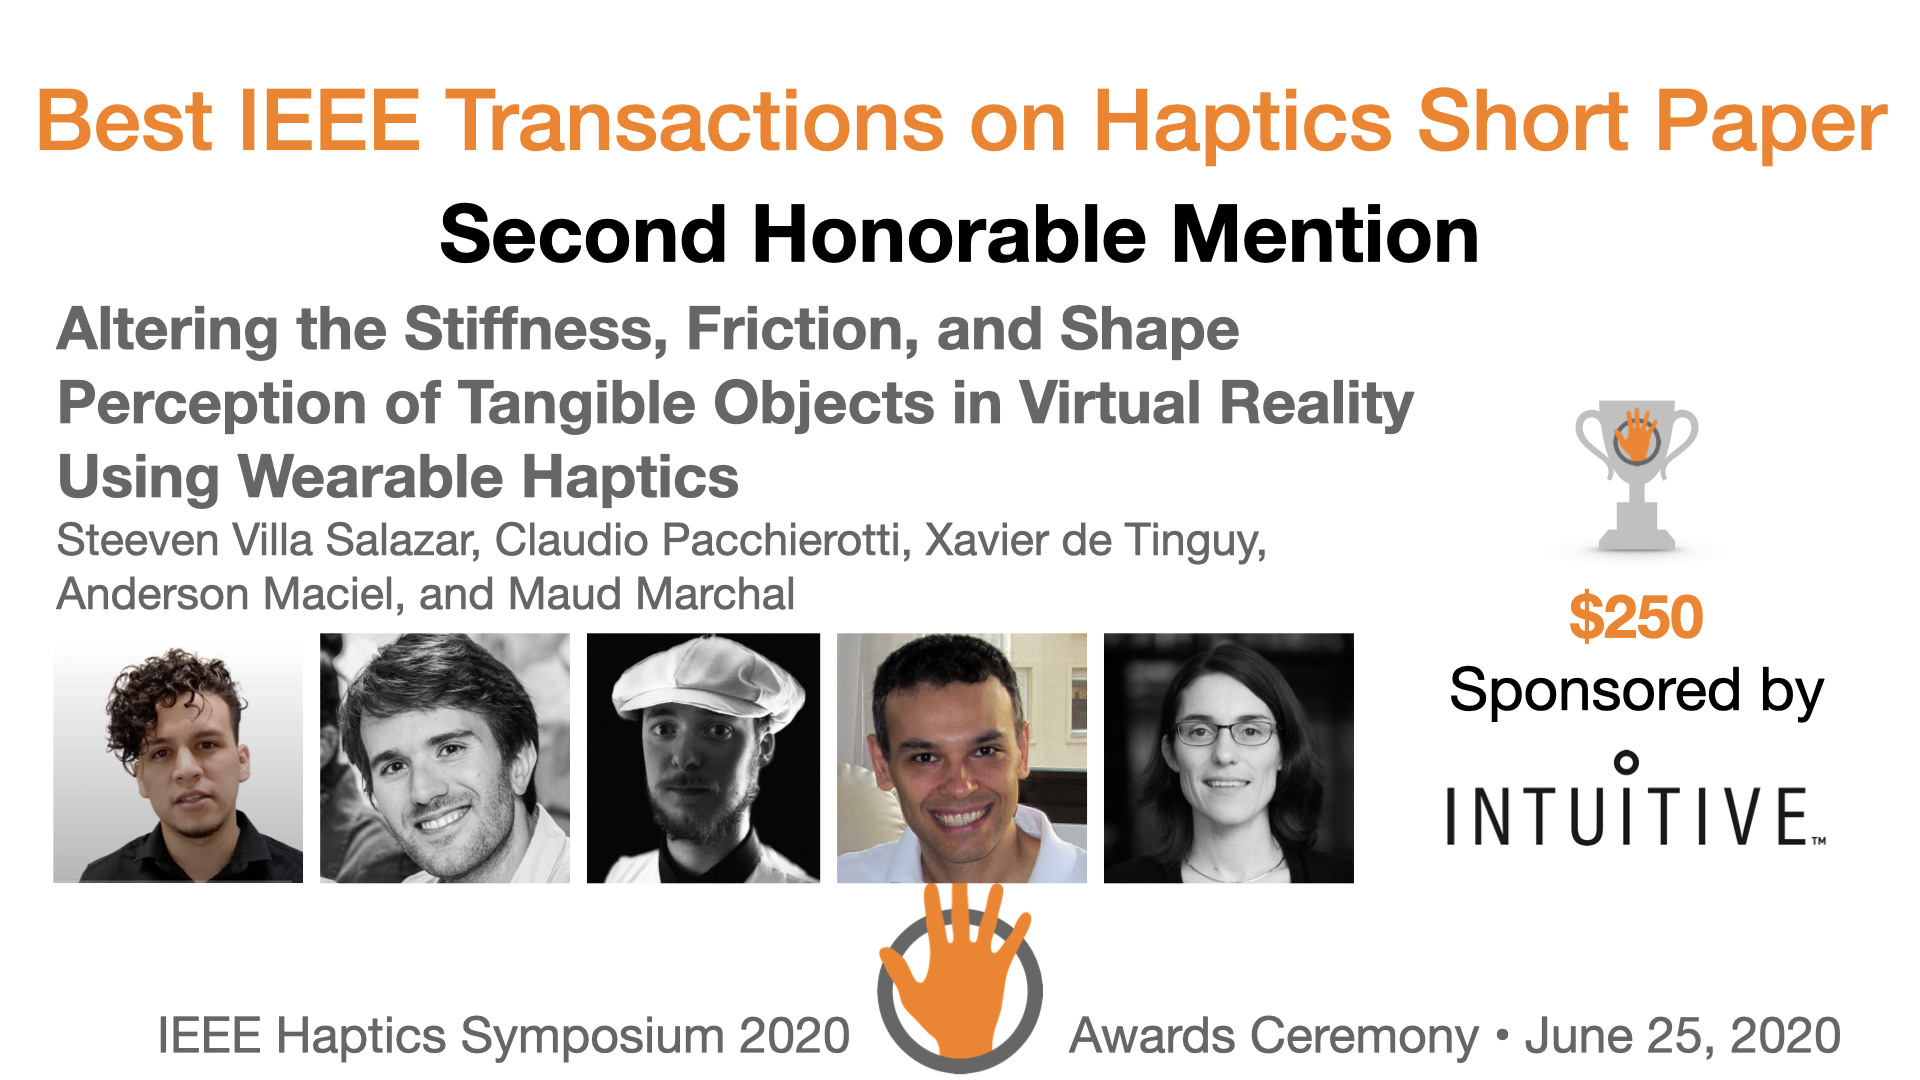 An award slide featuring the authors and sponsor